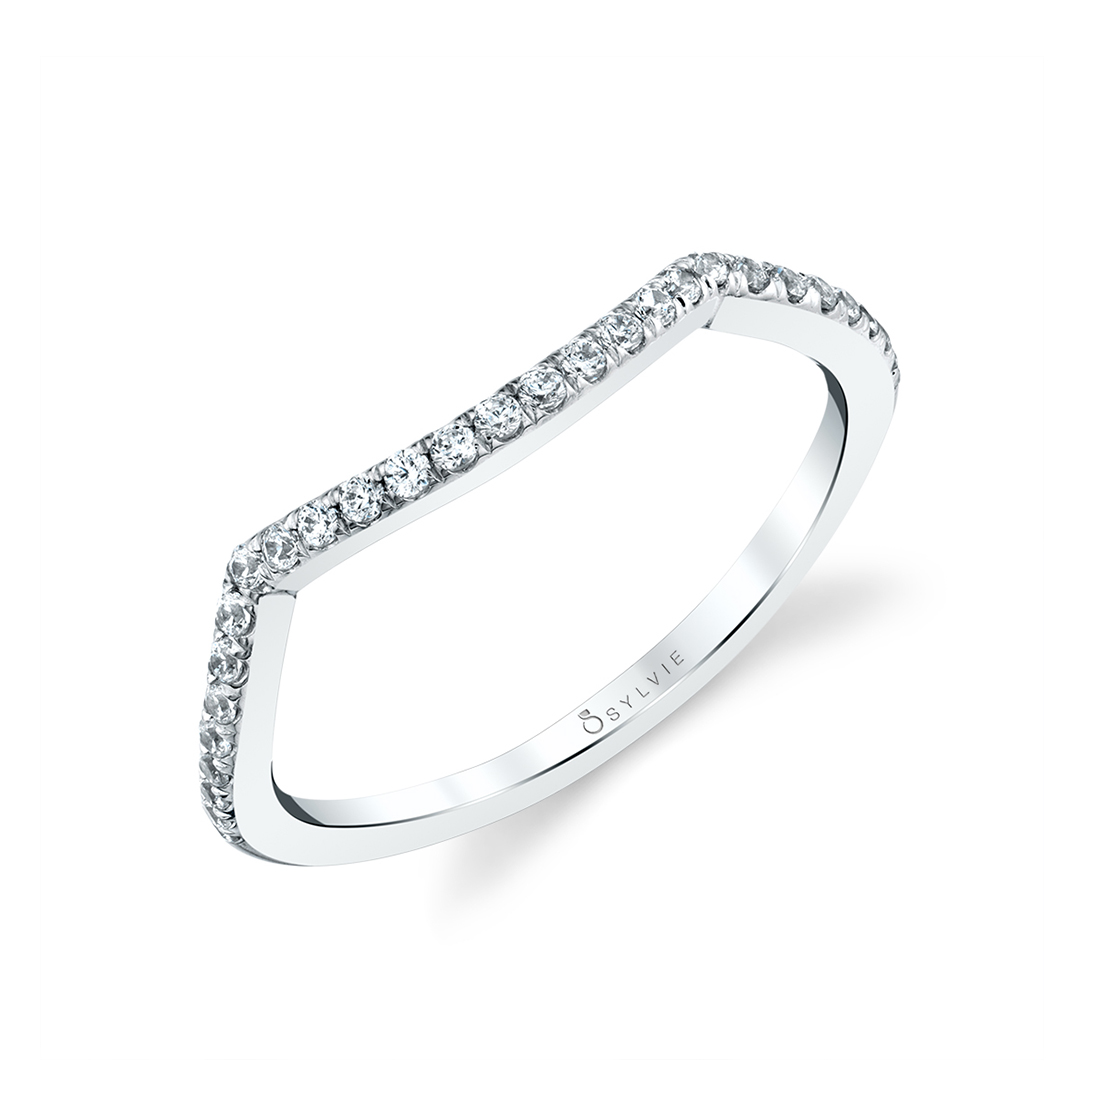 Profile image of a Twisted Engagement Ring with a hidden halo - Agnia Ring